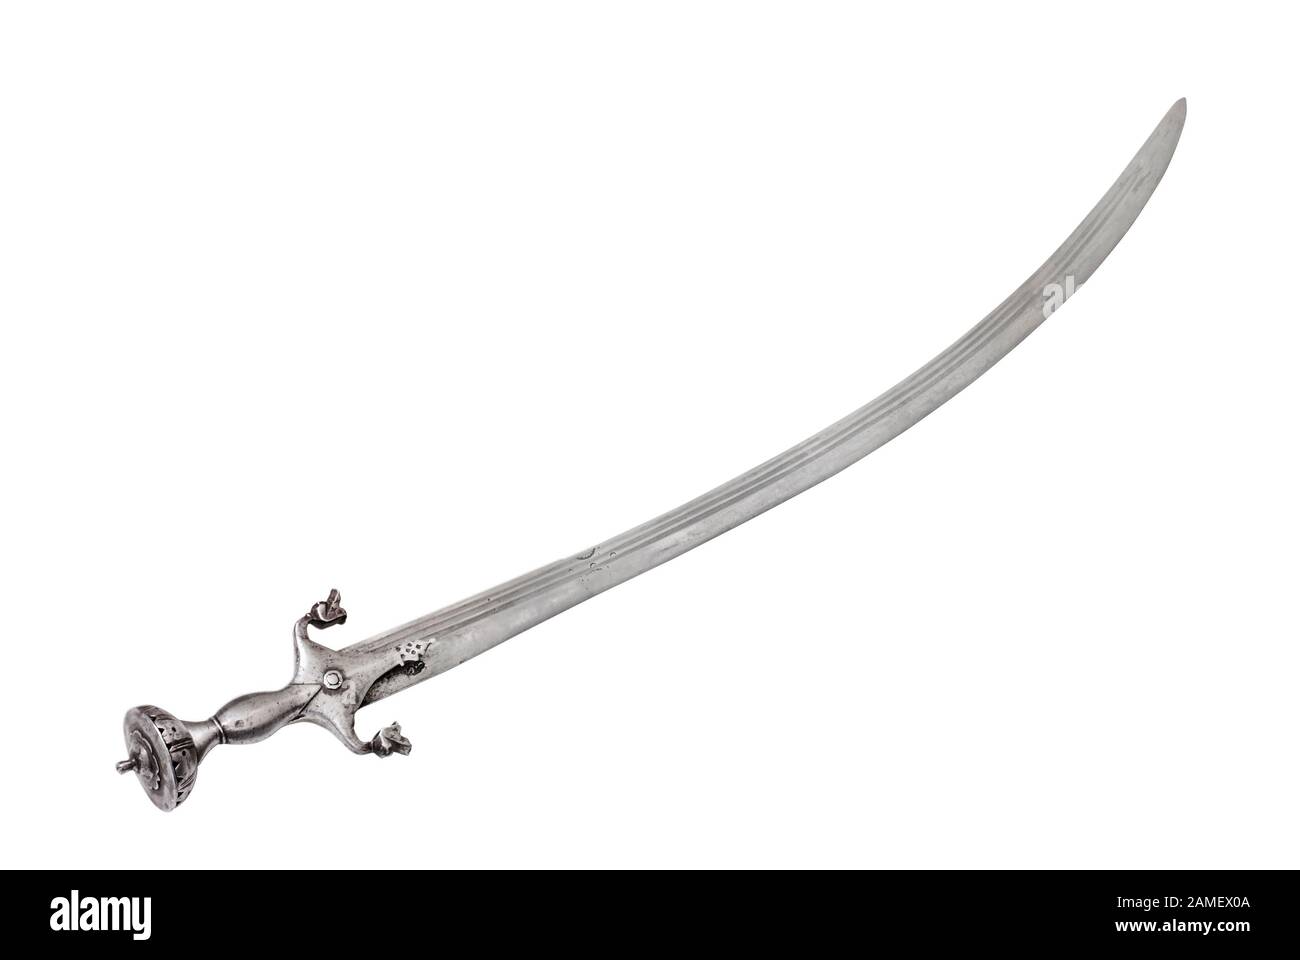 Afghan saber (sabre) Talwar type. The 18-19th centuries. Path on white background. Stock Photo